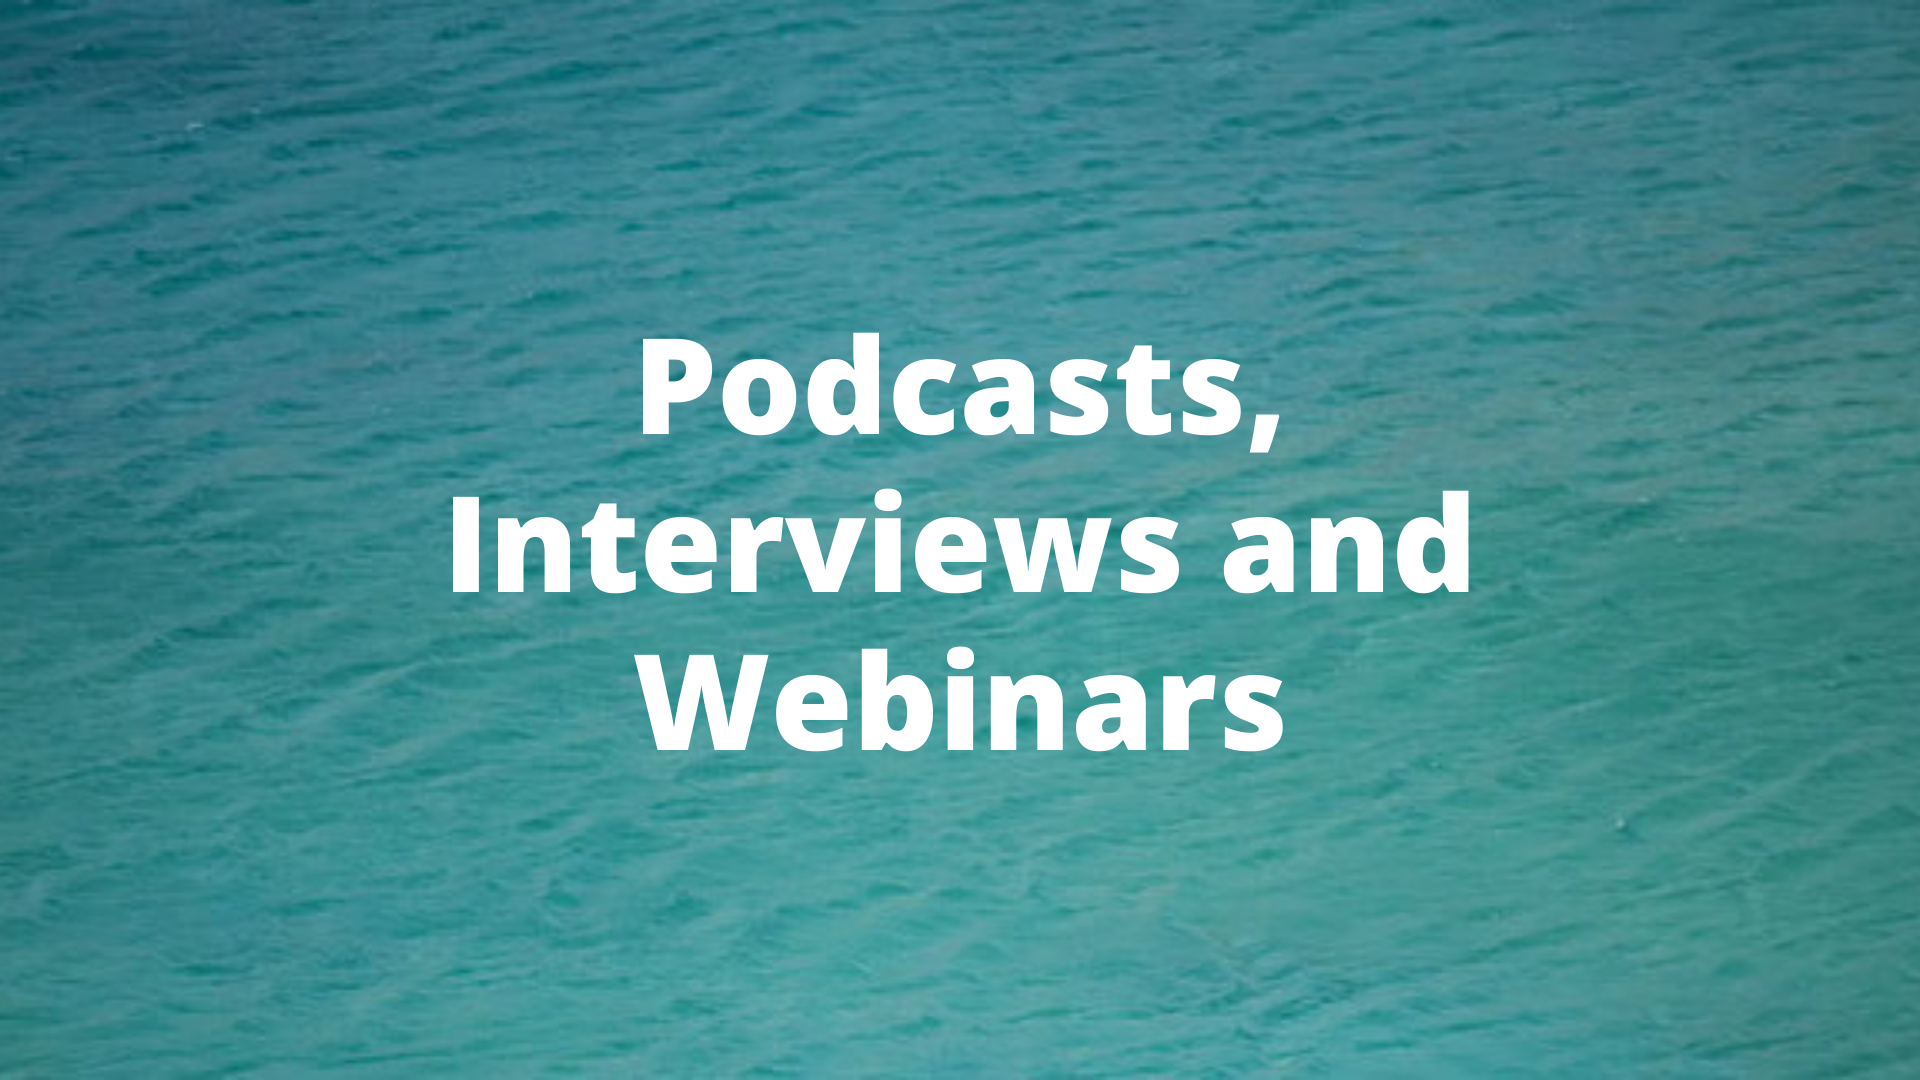 Podcasts, Interviews and Webinars